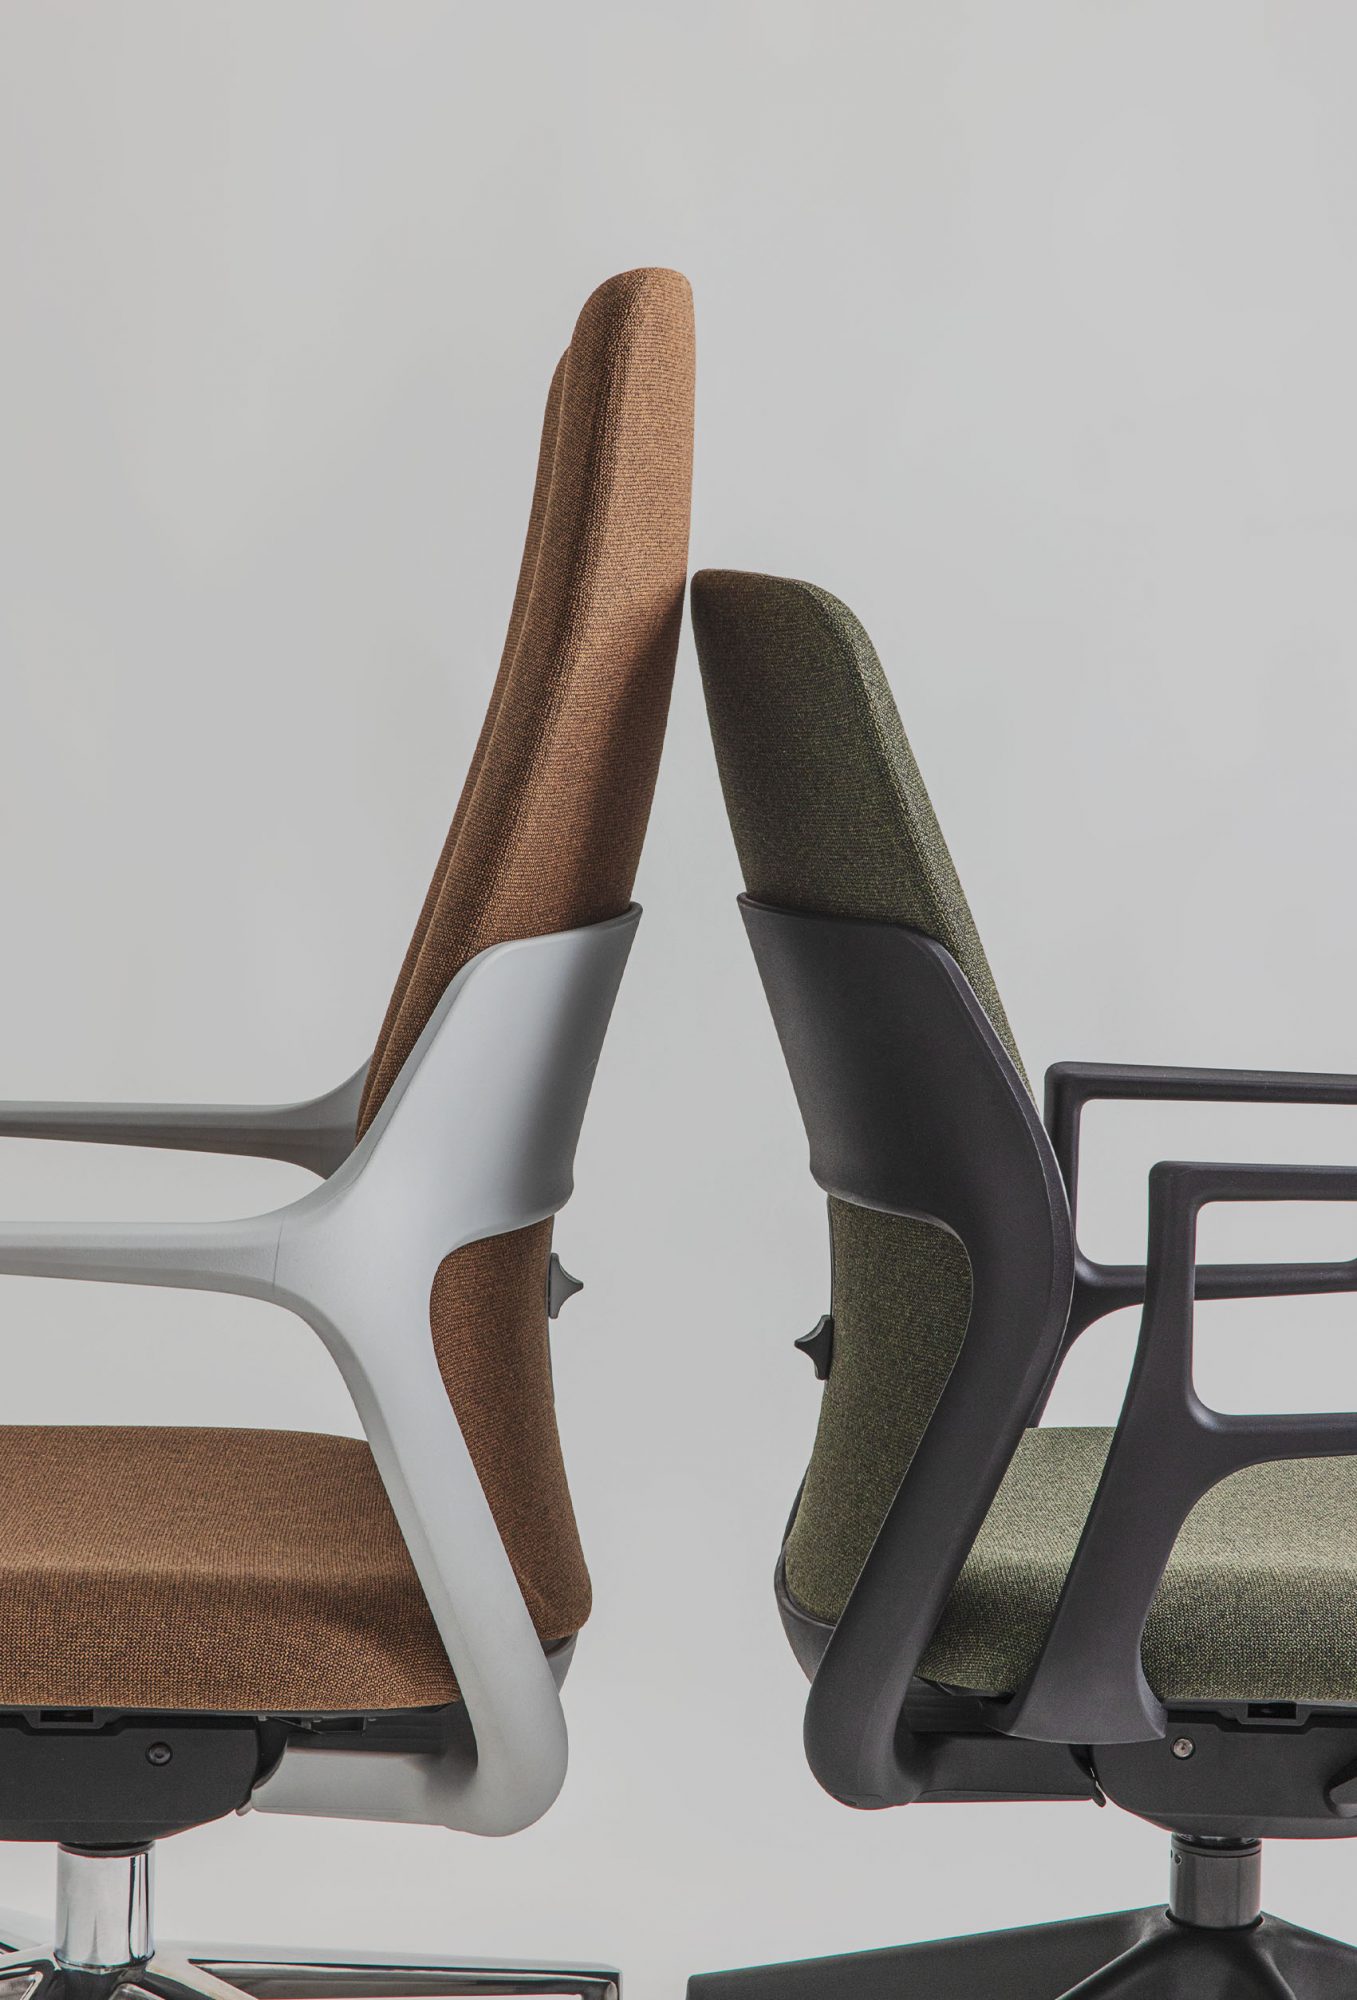 Two OFY chairs by Narbutas, designed by Alegre Design. The chairs feature an innovative thermoplastic back, customizable finishes in brown and green, and a button to adjust lumbar height, ideal for ergonomic support in modern workspaces.